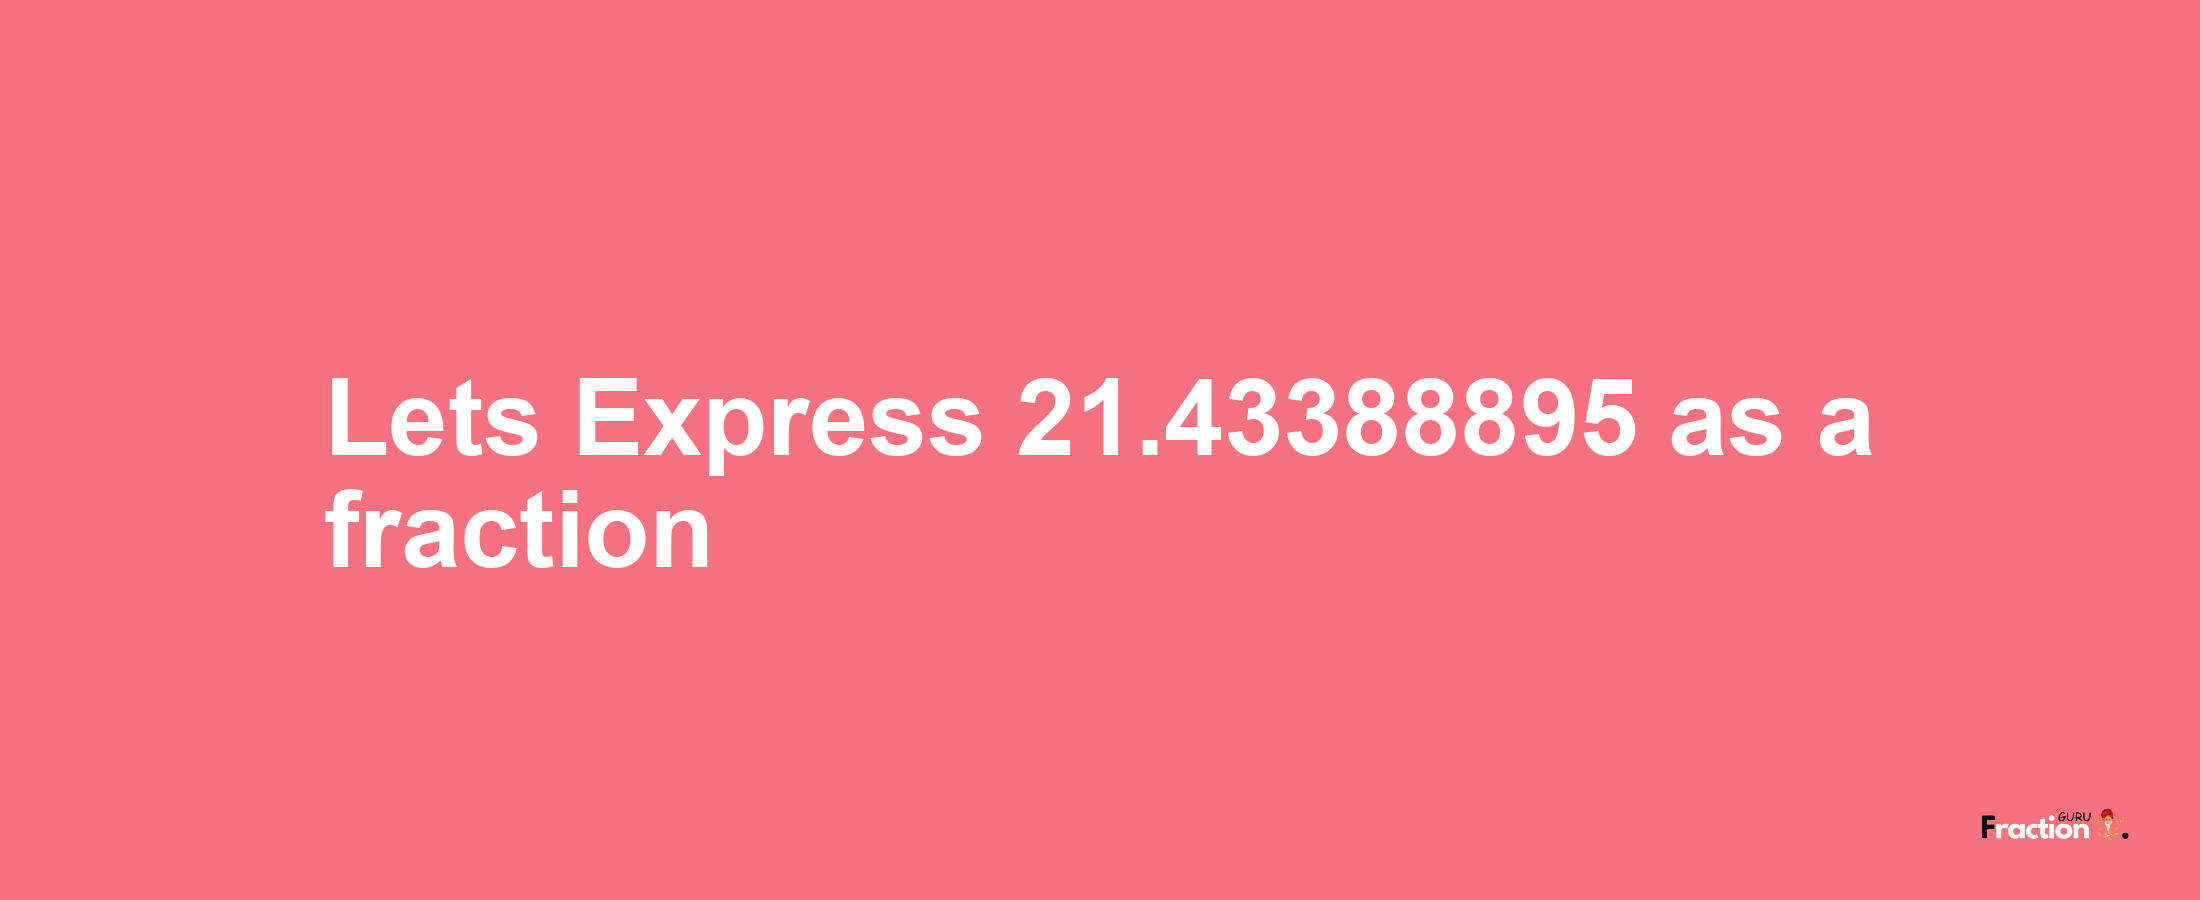 Lets Express 21.43388895 as afraction